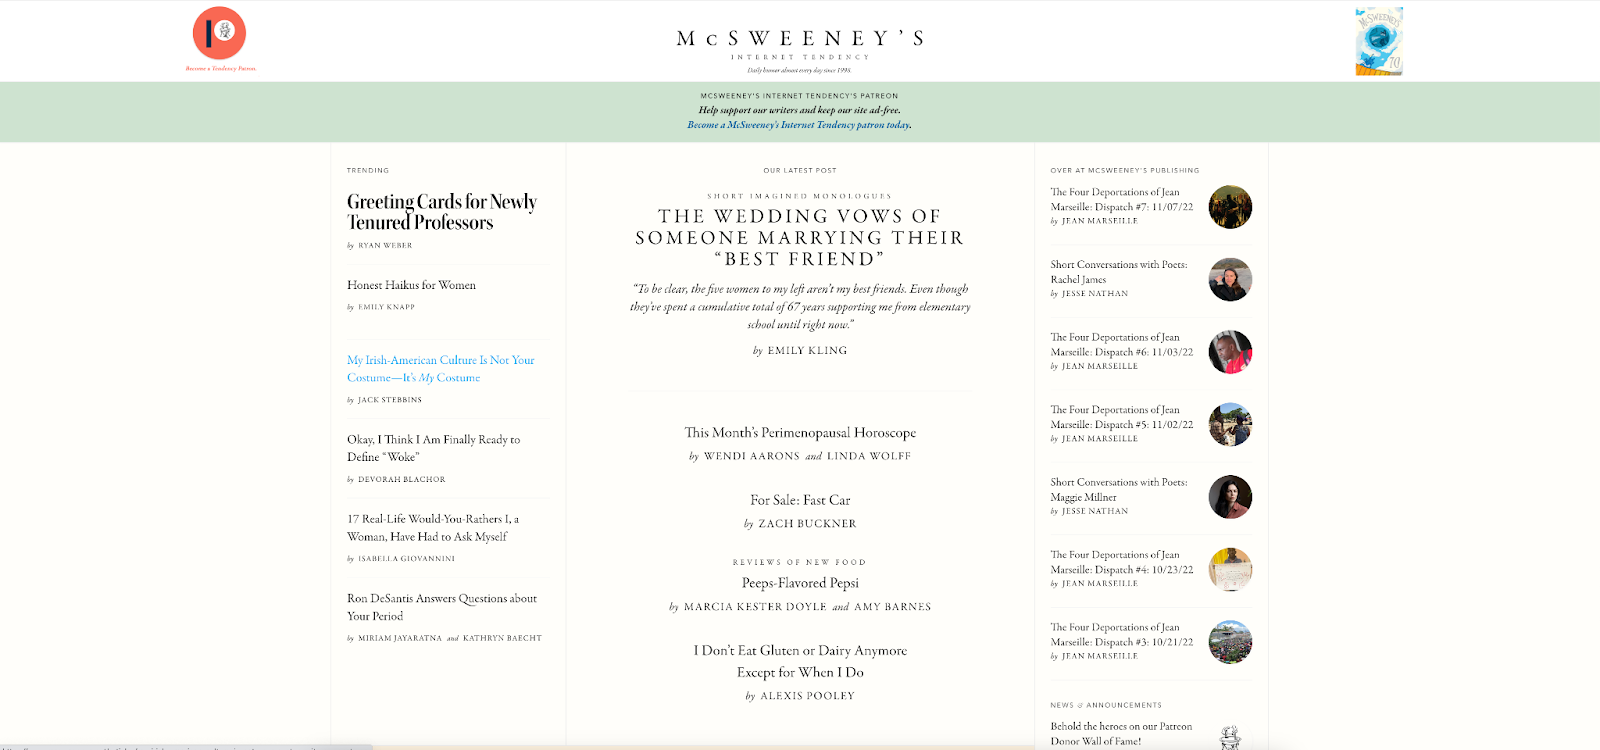 McSweeney’s is a magazine that plays with a retro vibe to create a vintage literary magazine look and feel